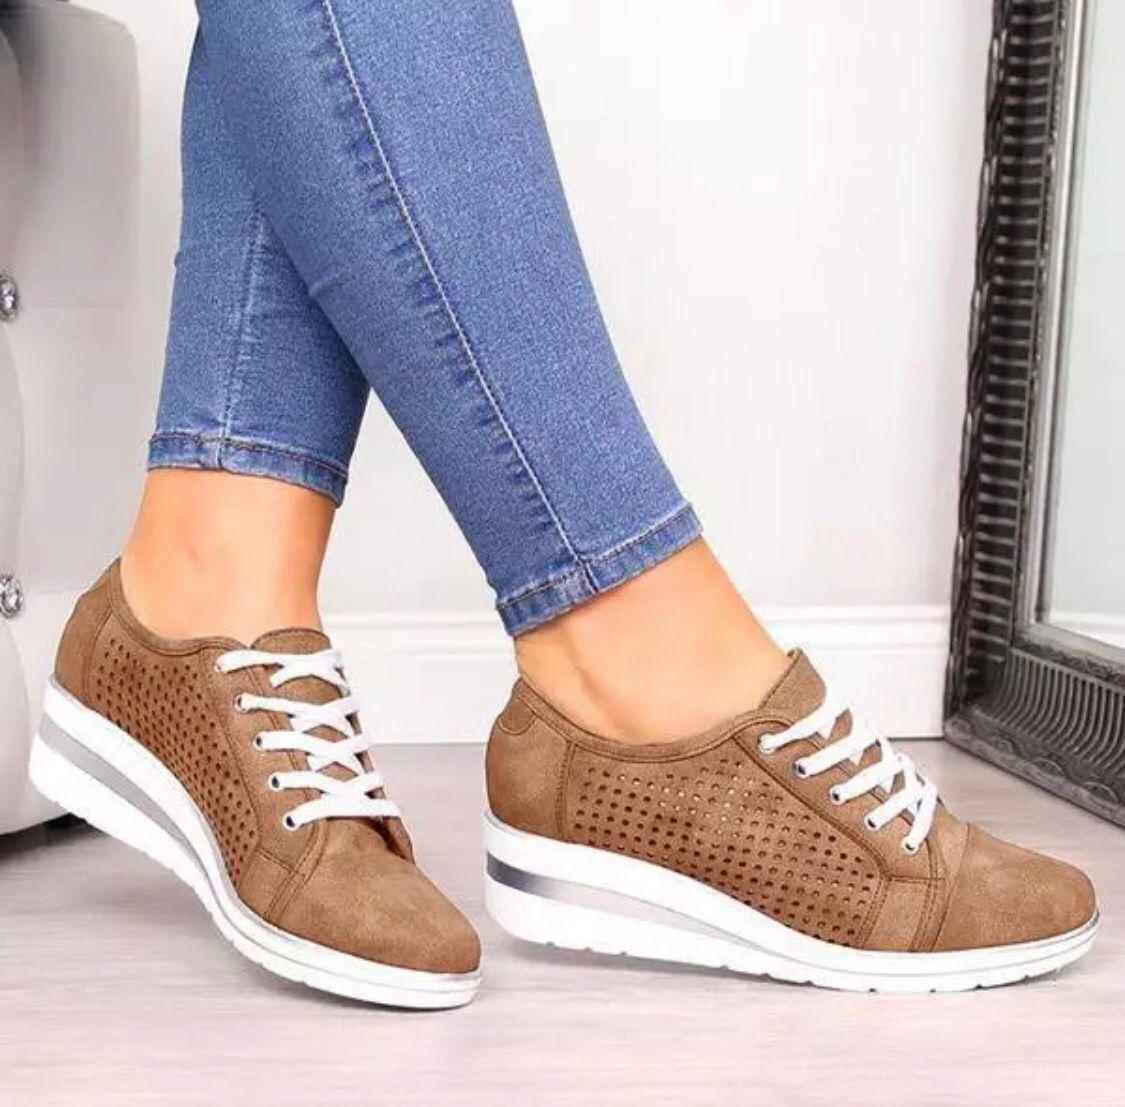 Comfortable wedge openwork breathable lace-up casual sneakers - fits